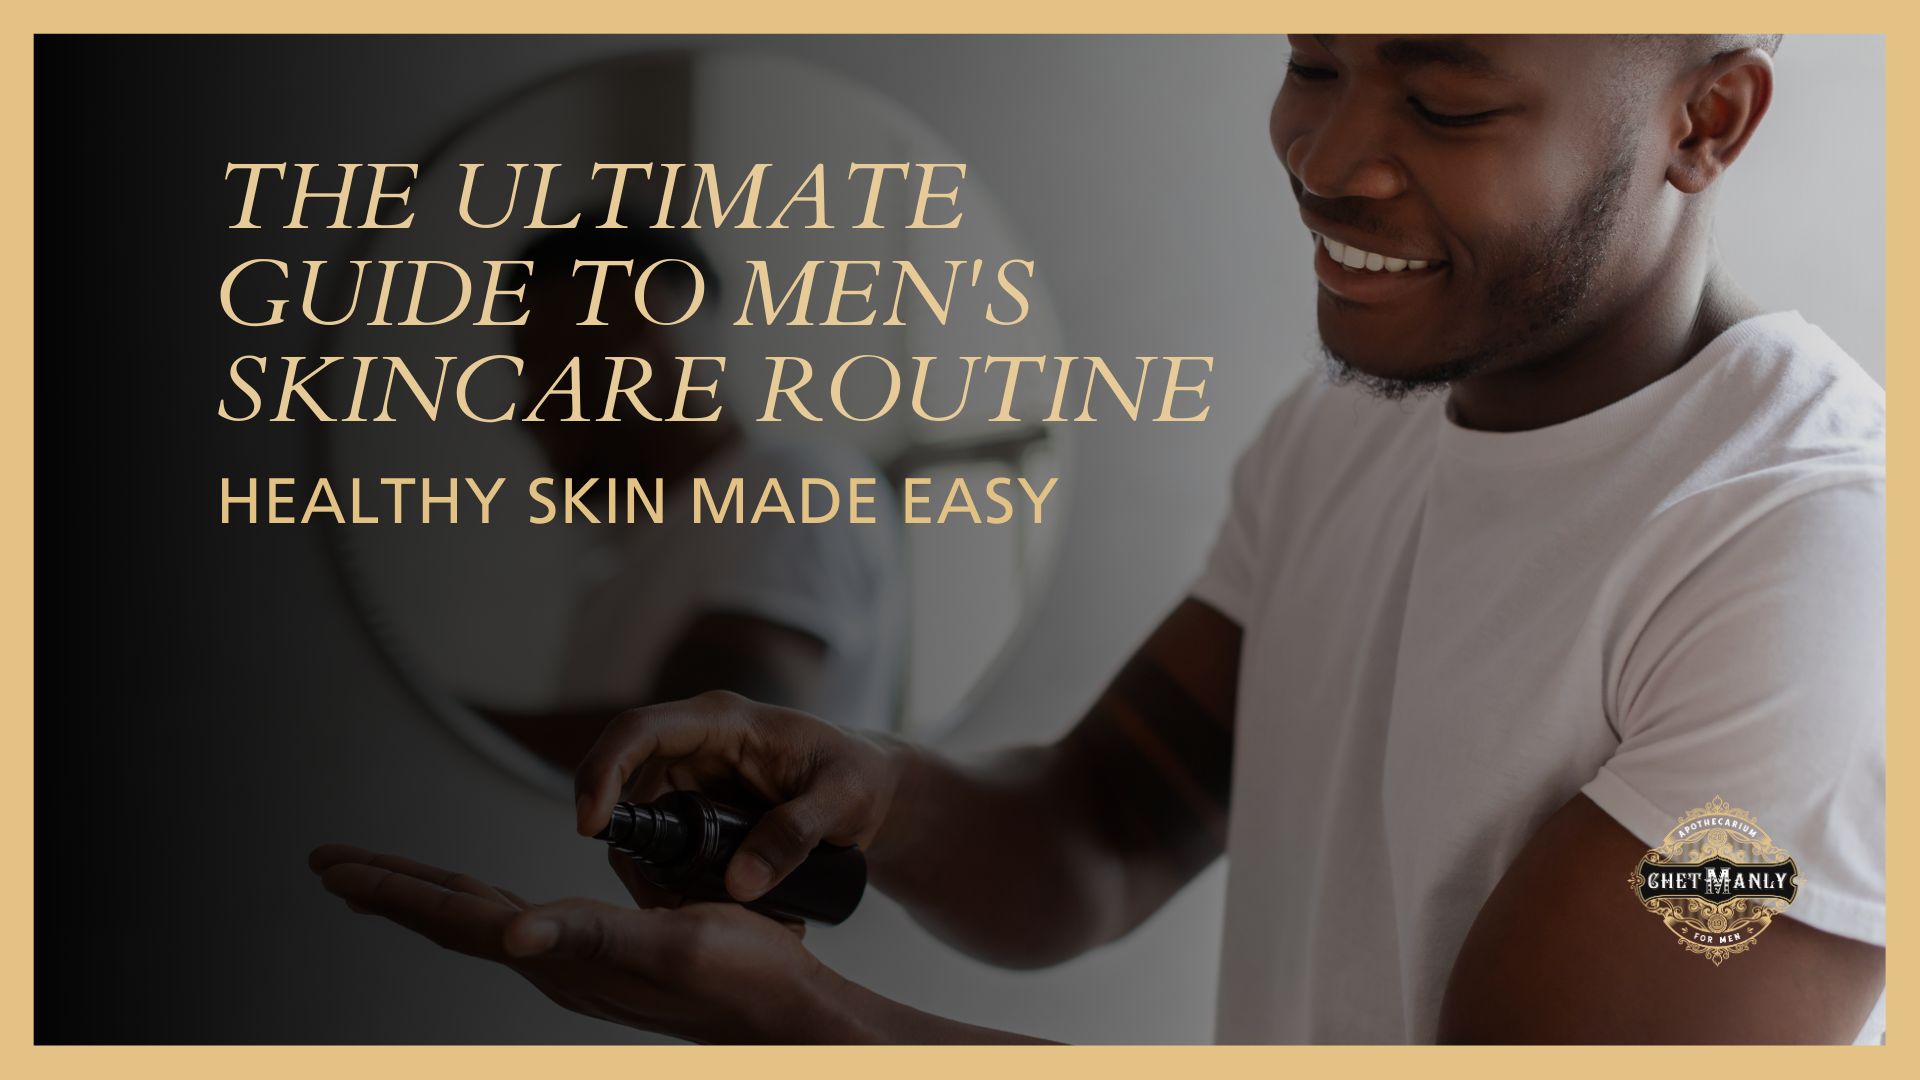 The Ultimate Guide to Men's Skincare Routine: Healthy Skin Made Easy